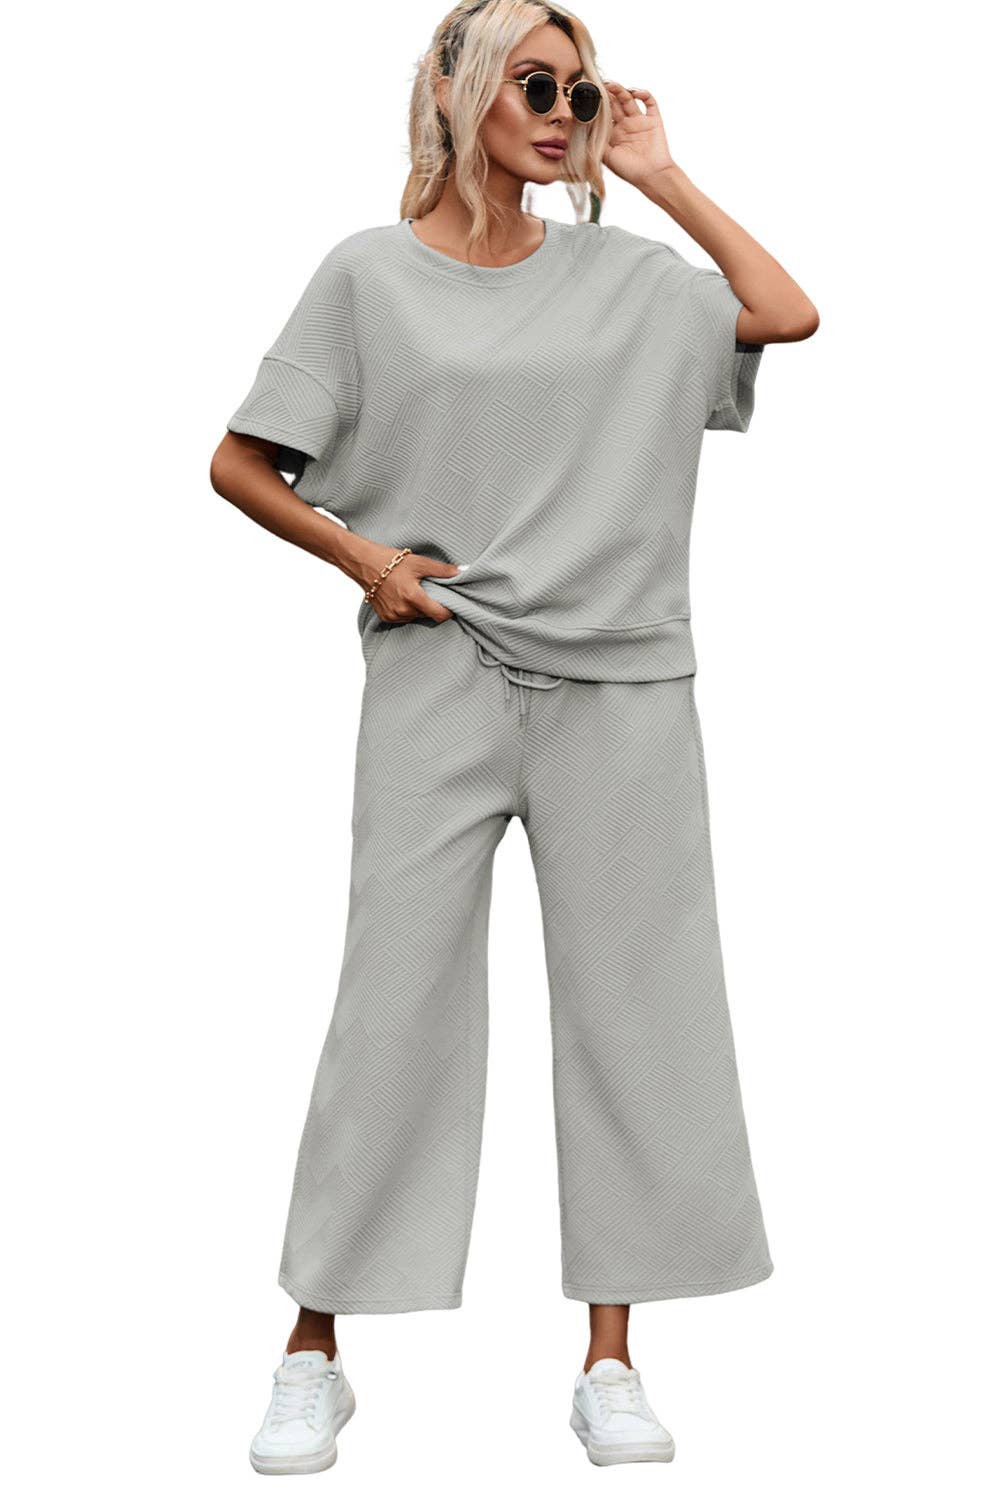 LAST ONE Gray Textured Loose Fit T Shirt and Drawstring Pants Set: Gray / 2XL / 95%Polyester+5%Elastane